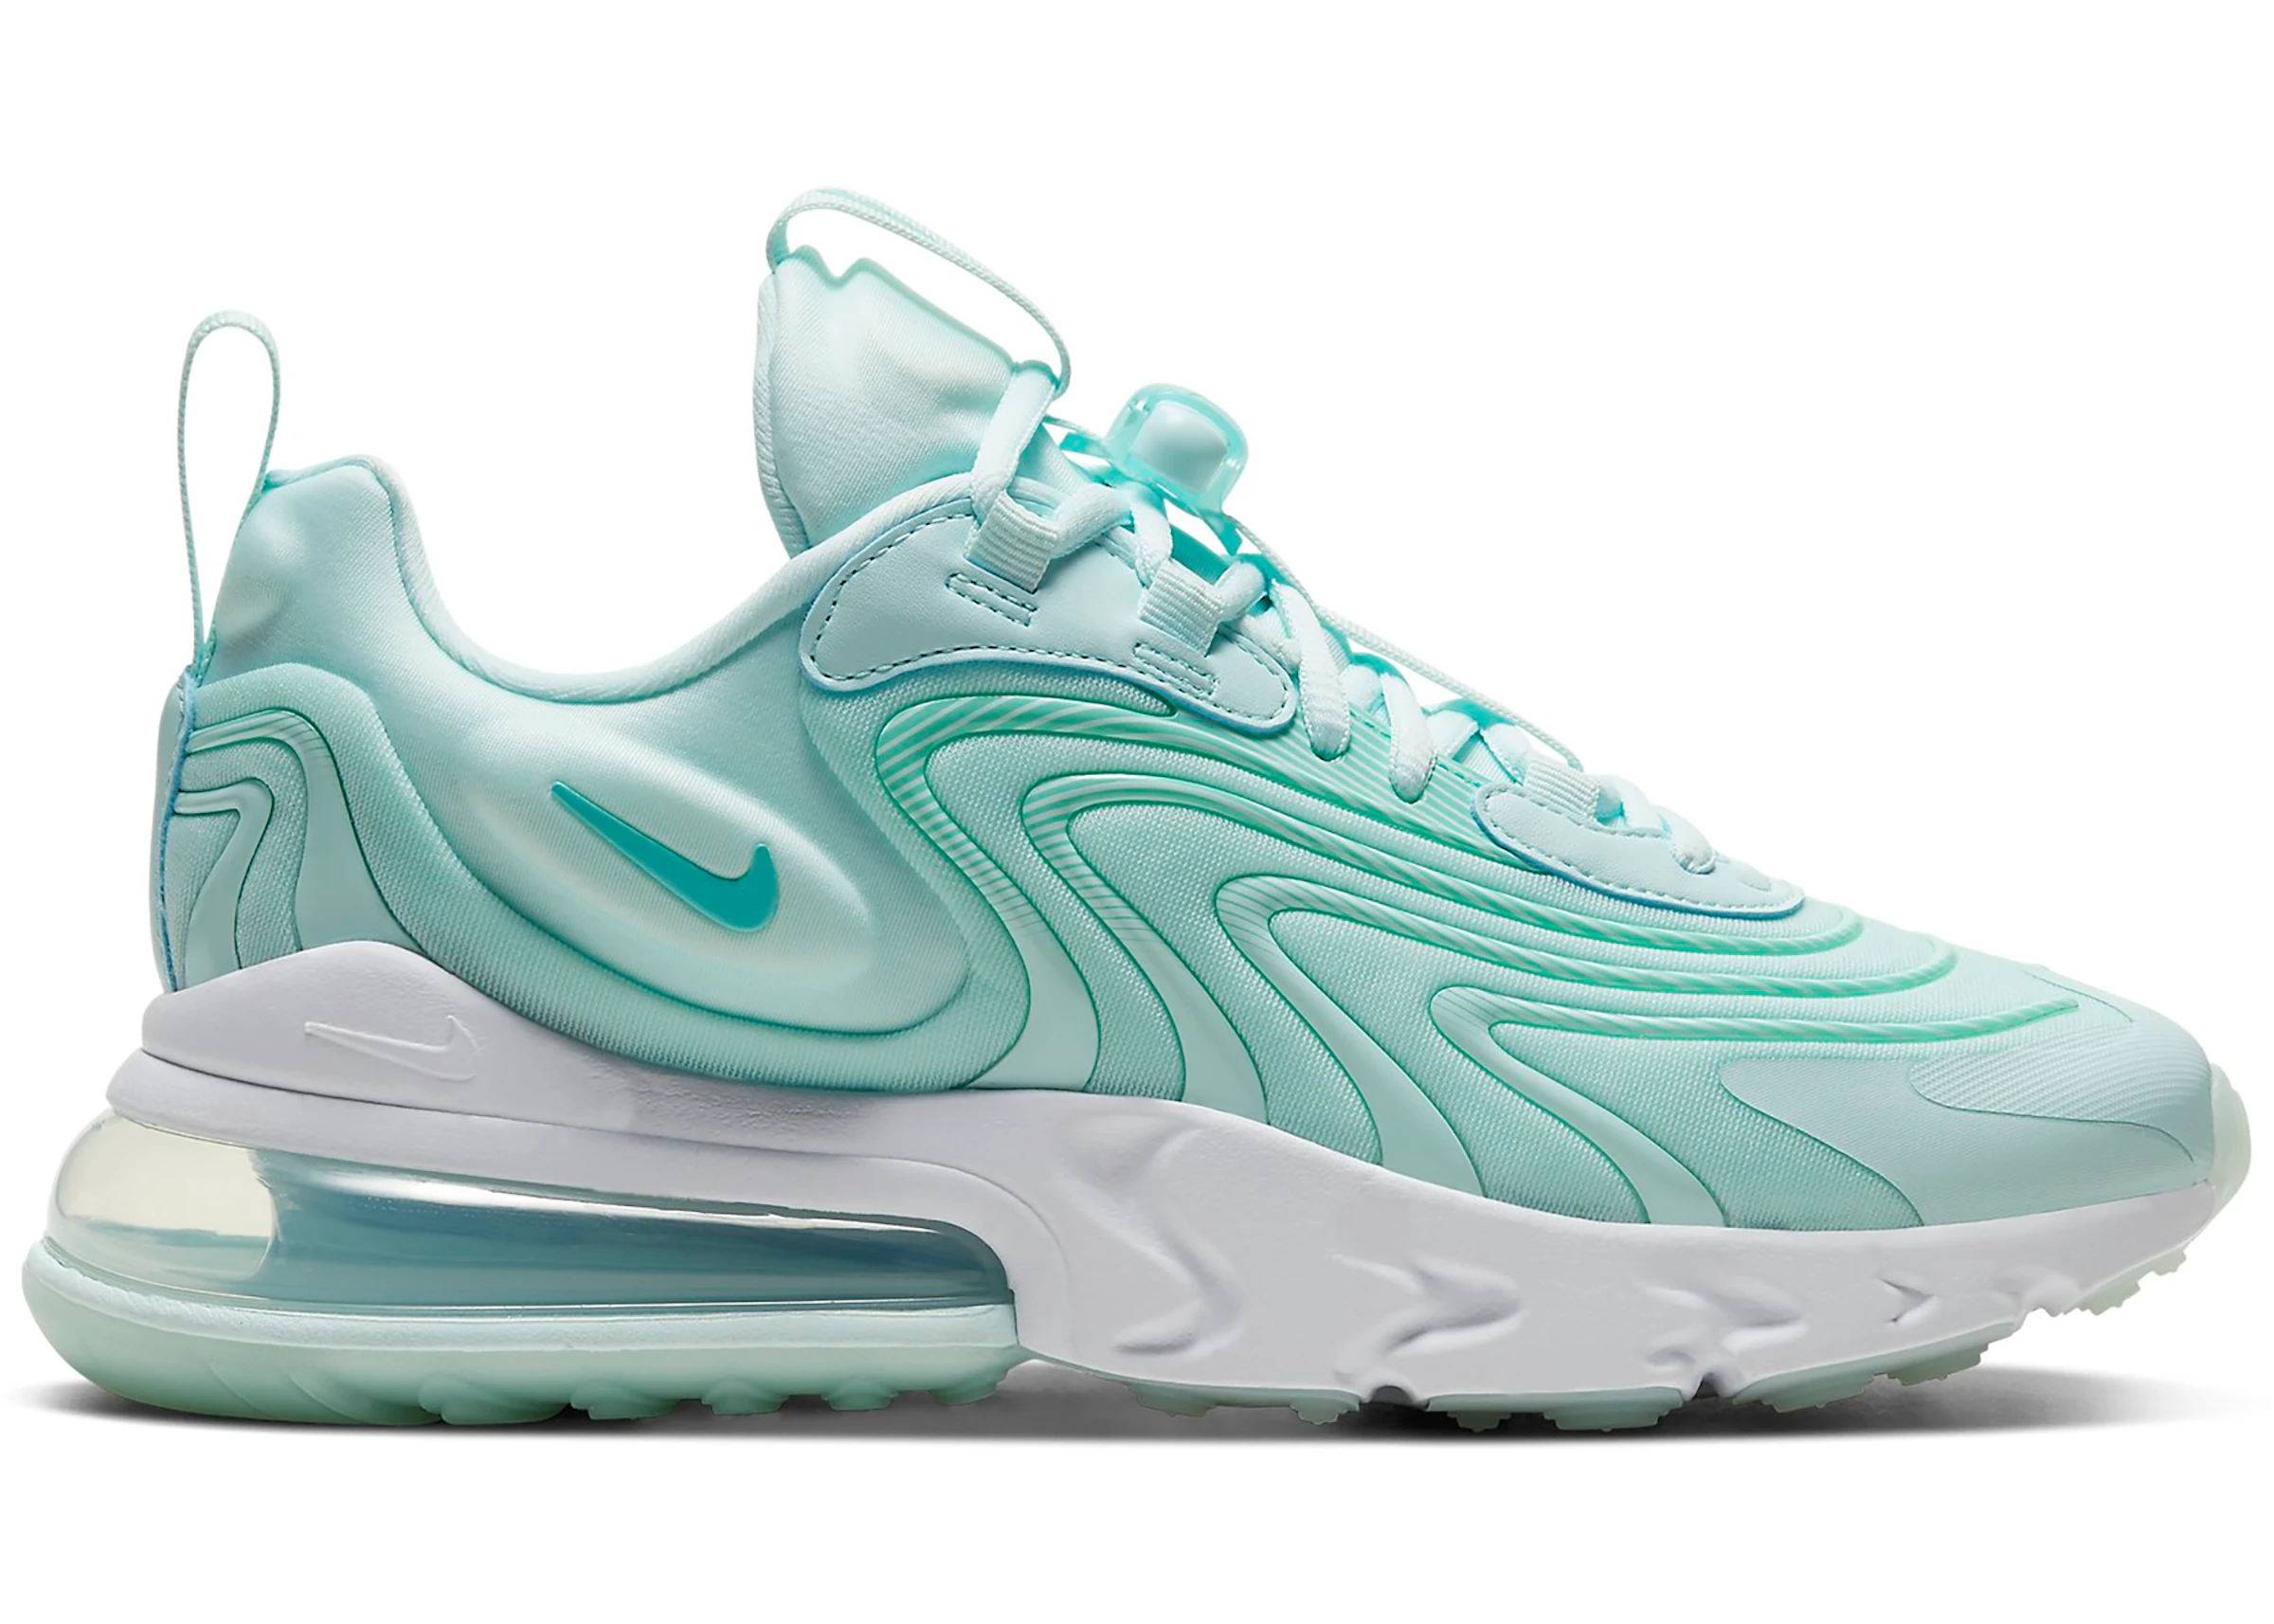 Valiente Impermeable Enfriarse Nike Air Max 270 React Eng Psychedelic Movement (W) - CK2608-300 - ES